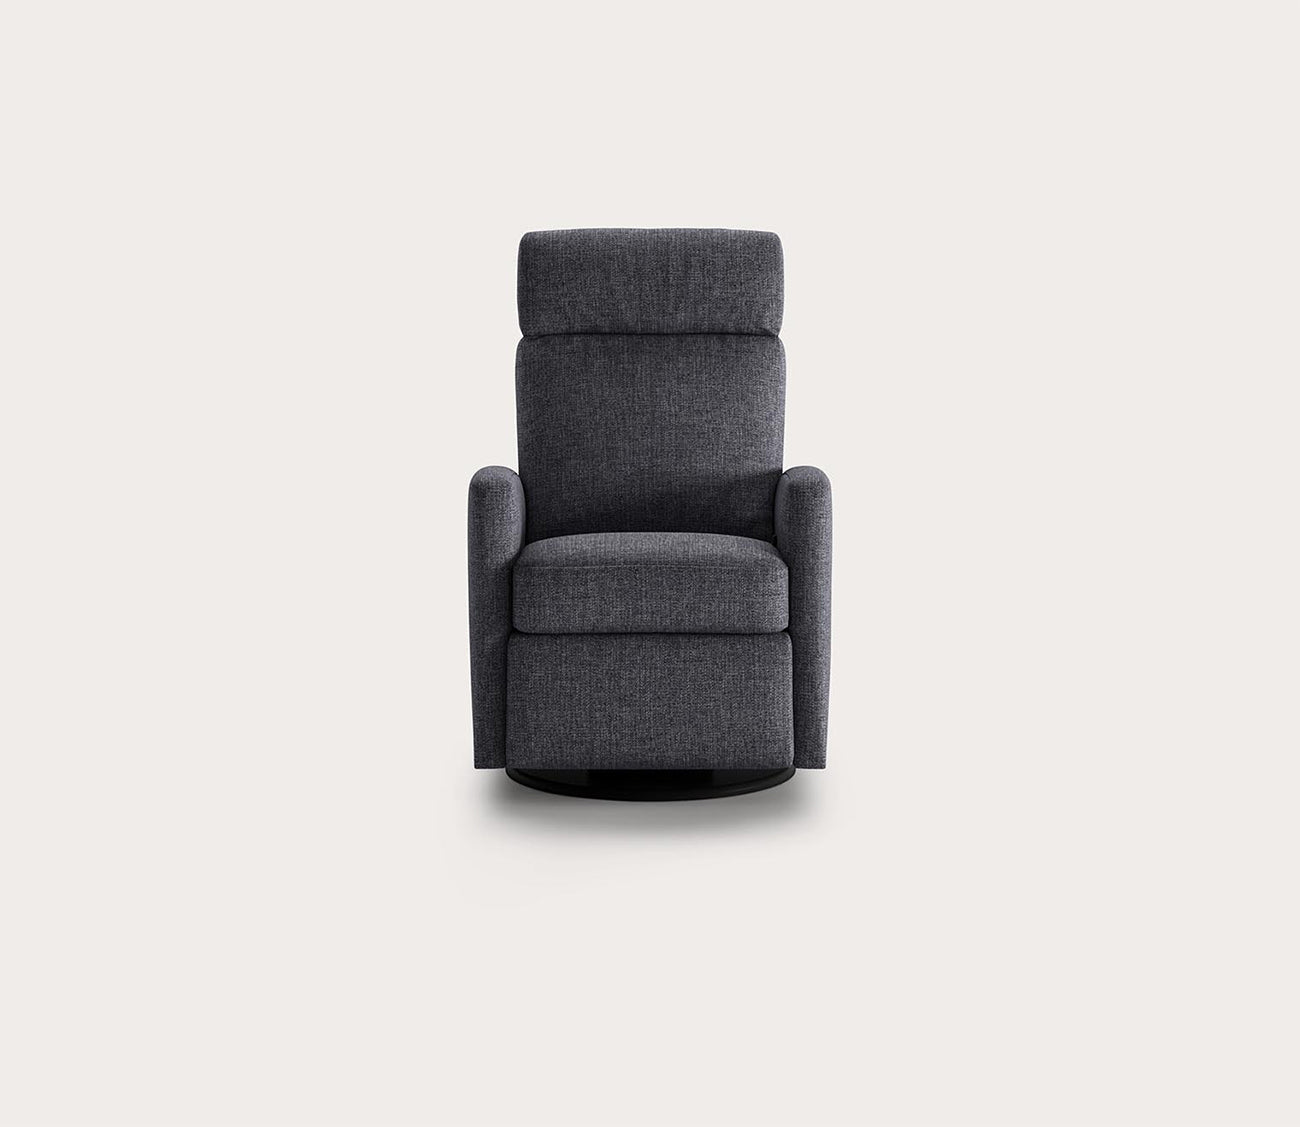 Track Lounger Recliner Chair by Luonto